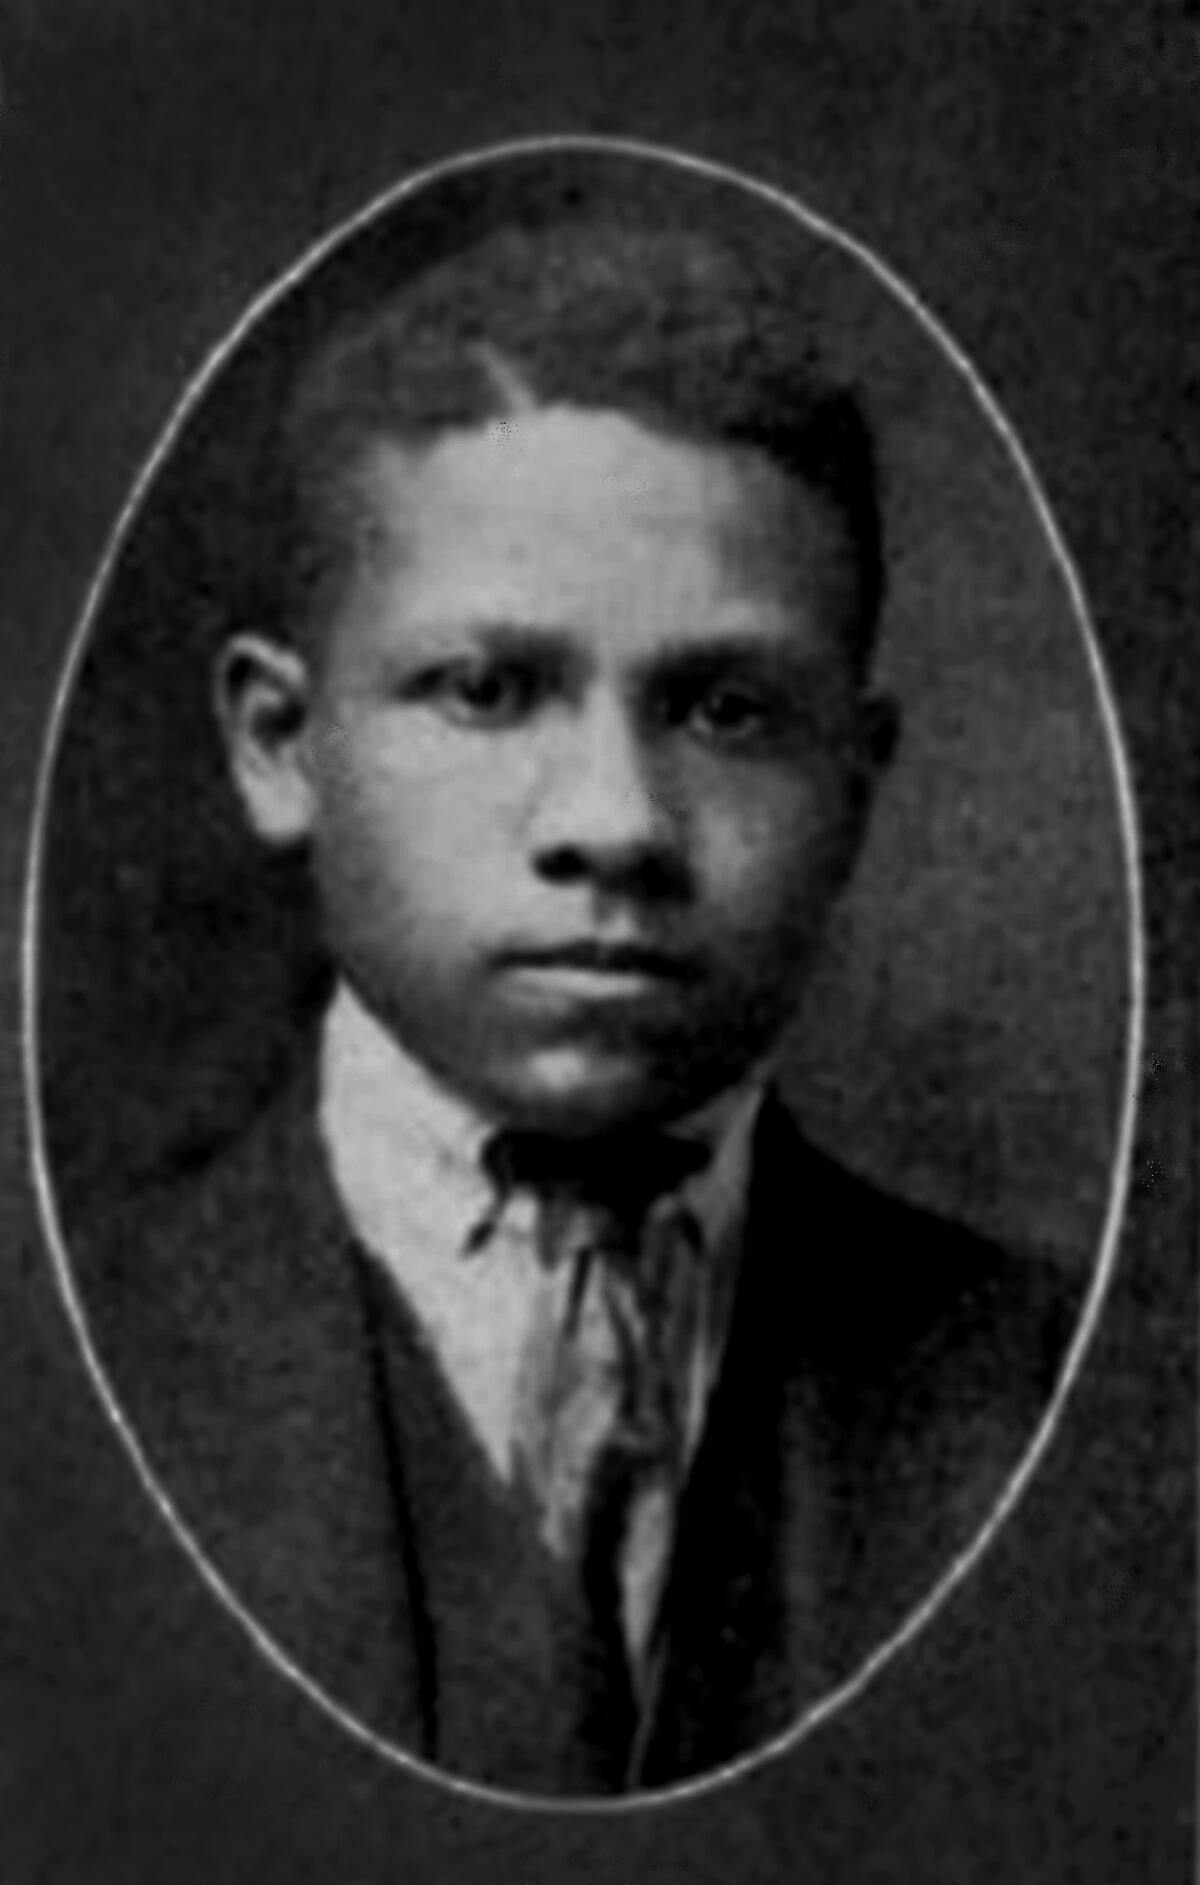 Halley Harding's high school yearbook photo from Rock Island High School, also known as "Rocky".